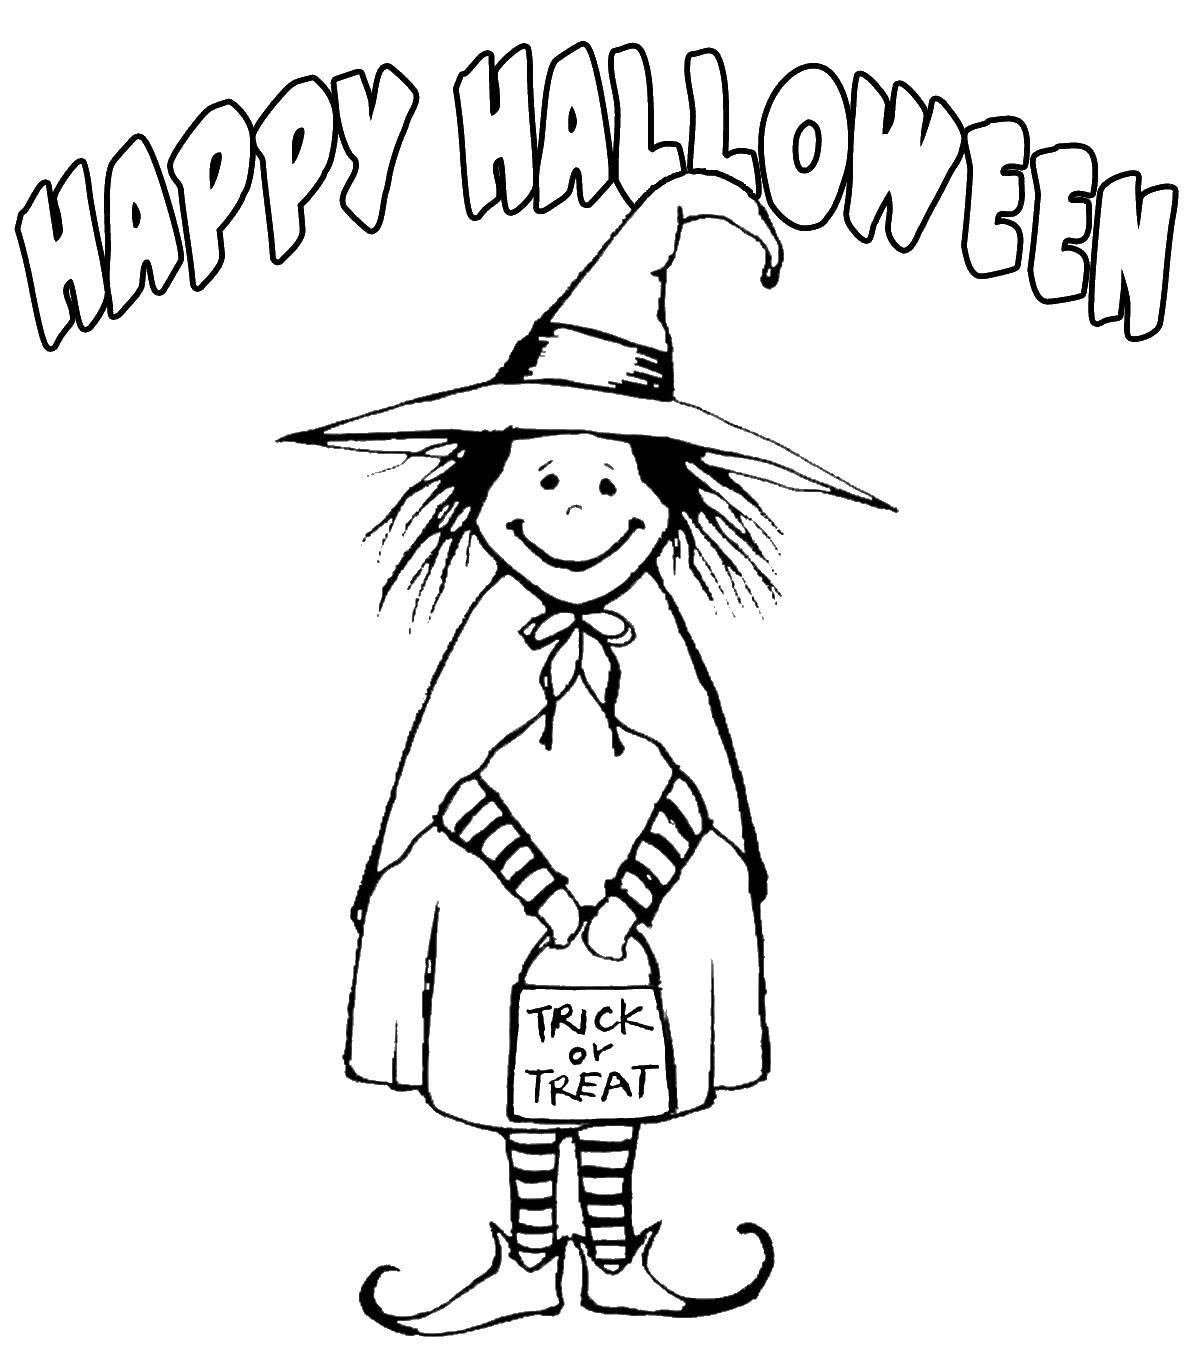 Coloring Happy Halloween. Category witch. Tags:  Halloween, witch.